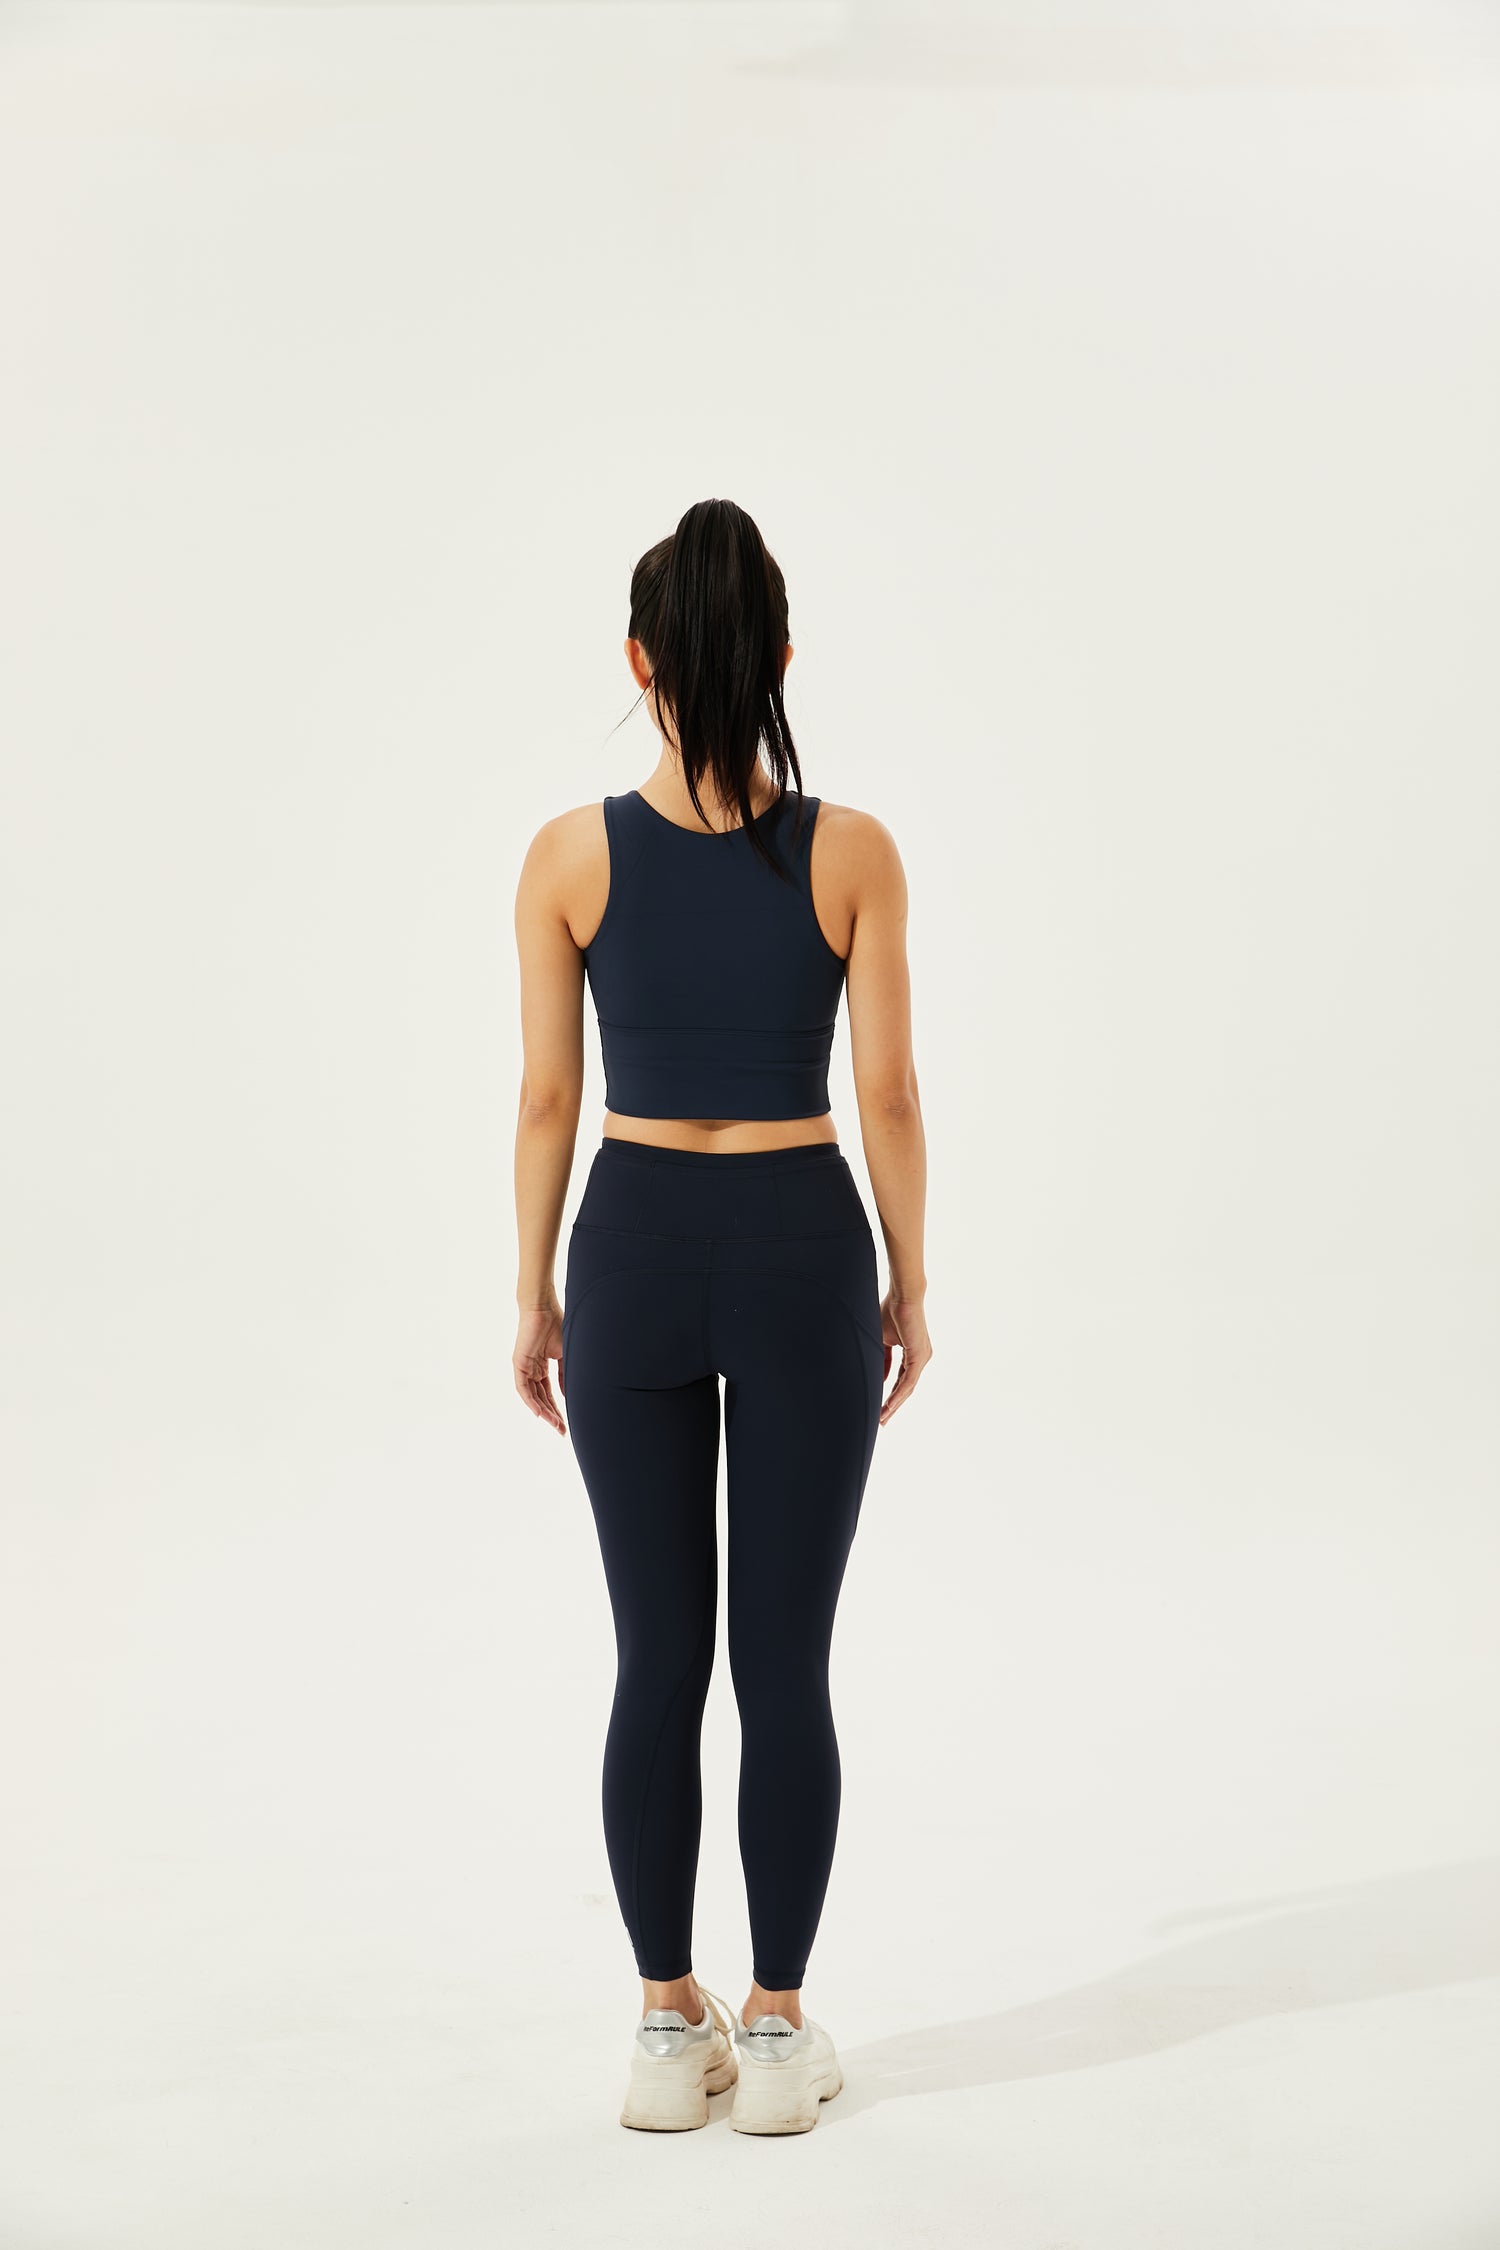 High-Waist Buttery Soft Camel-Toe Proof Snazzy High Intensity Leggings With 5 Pockets